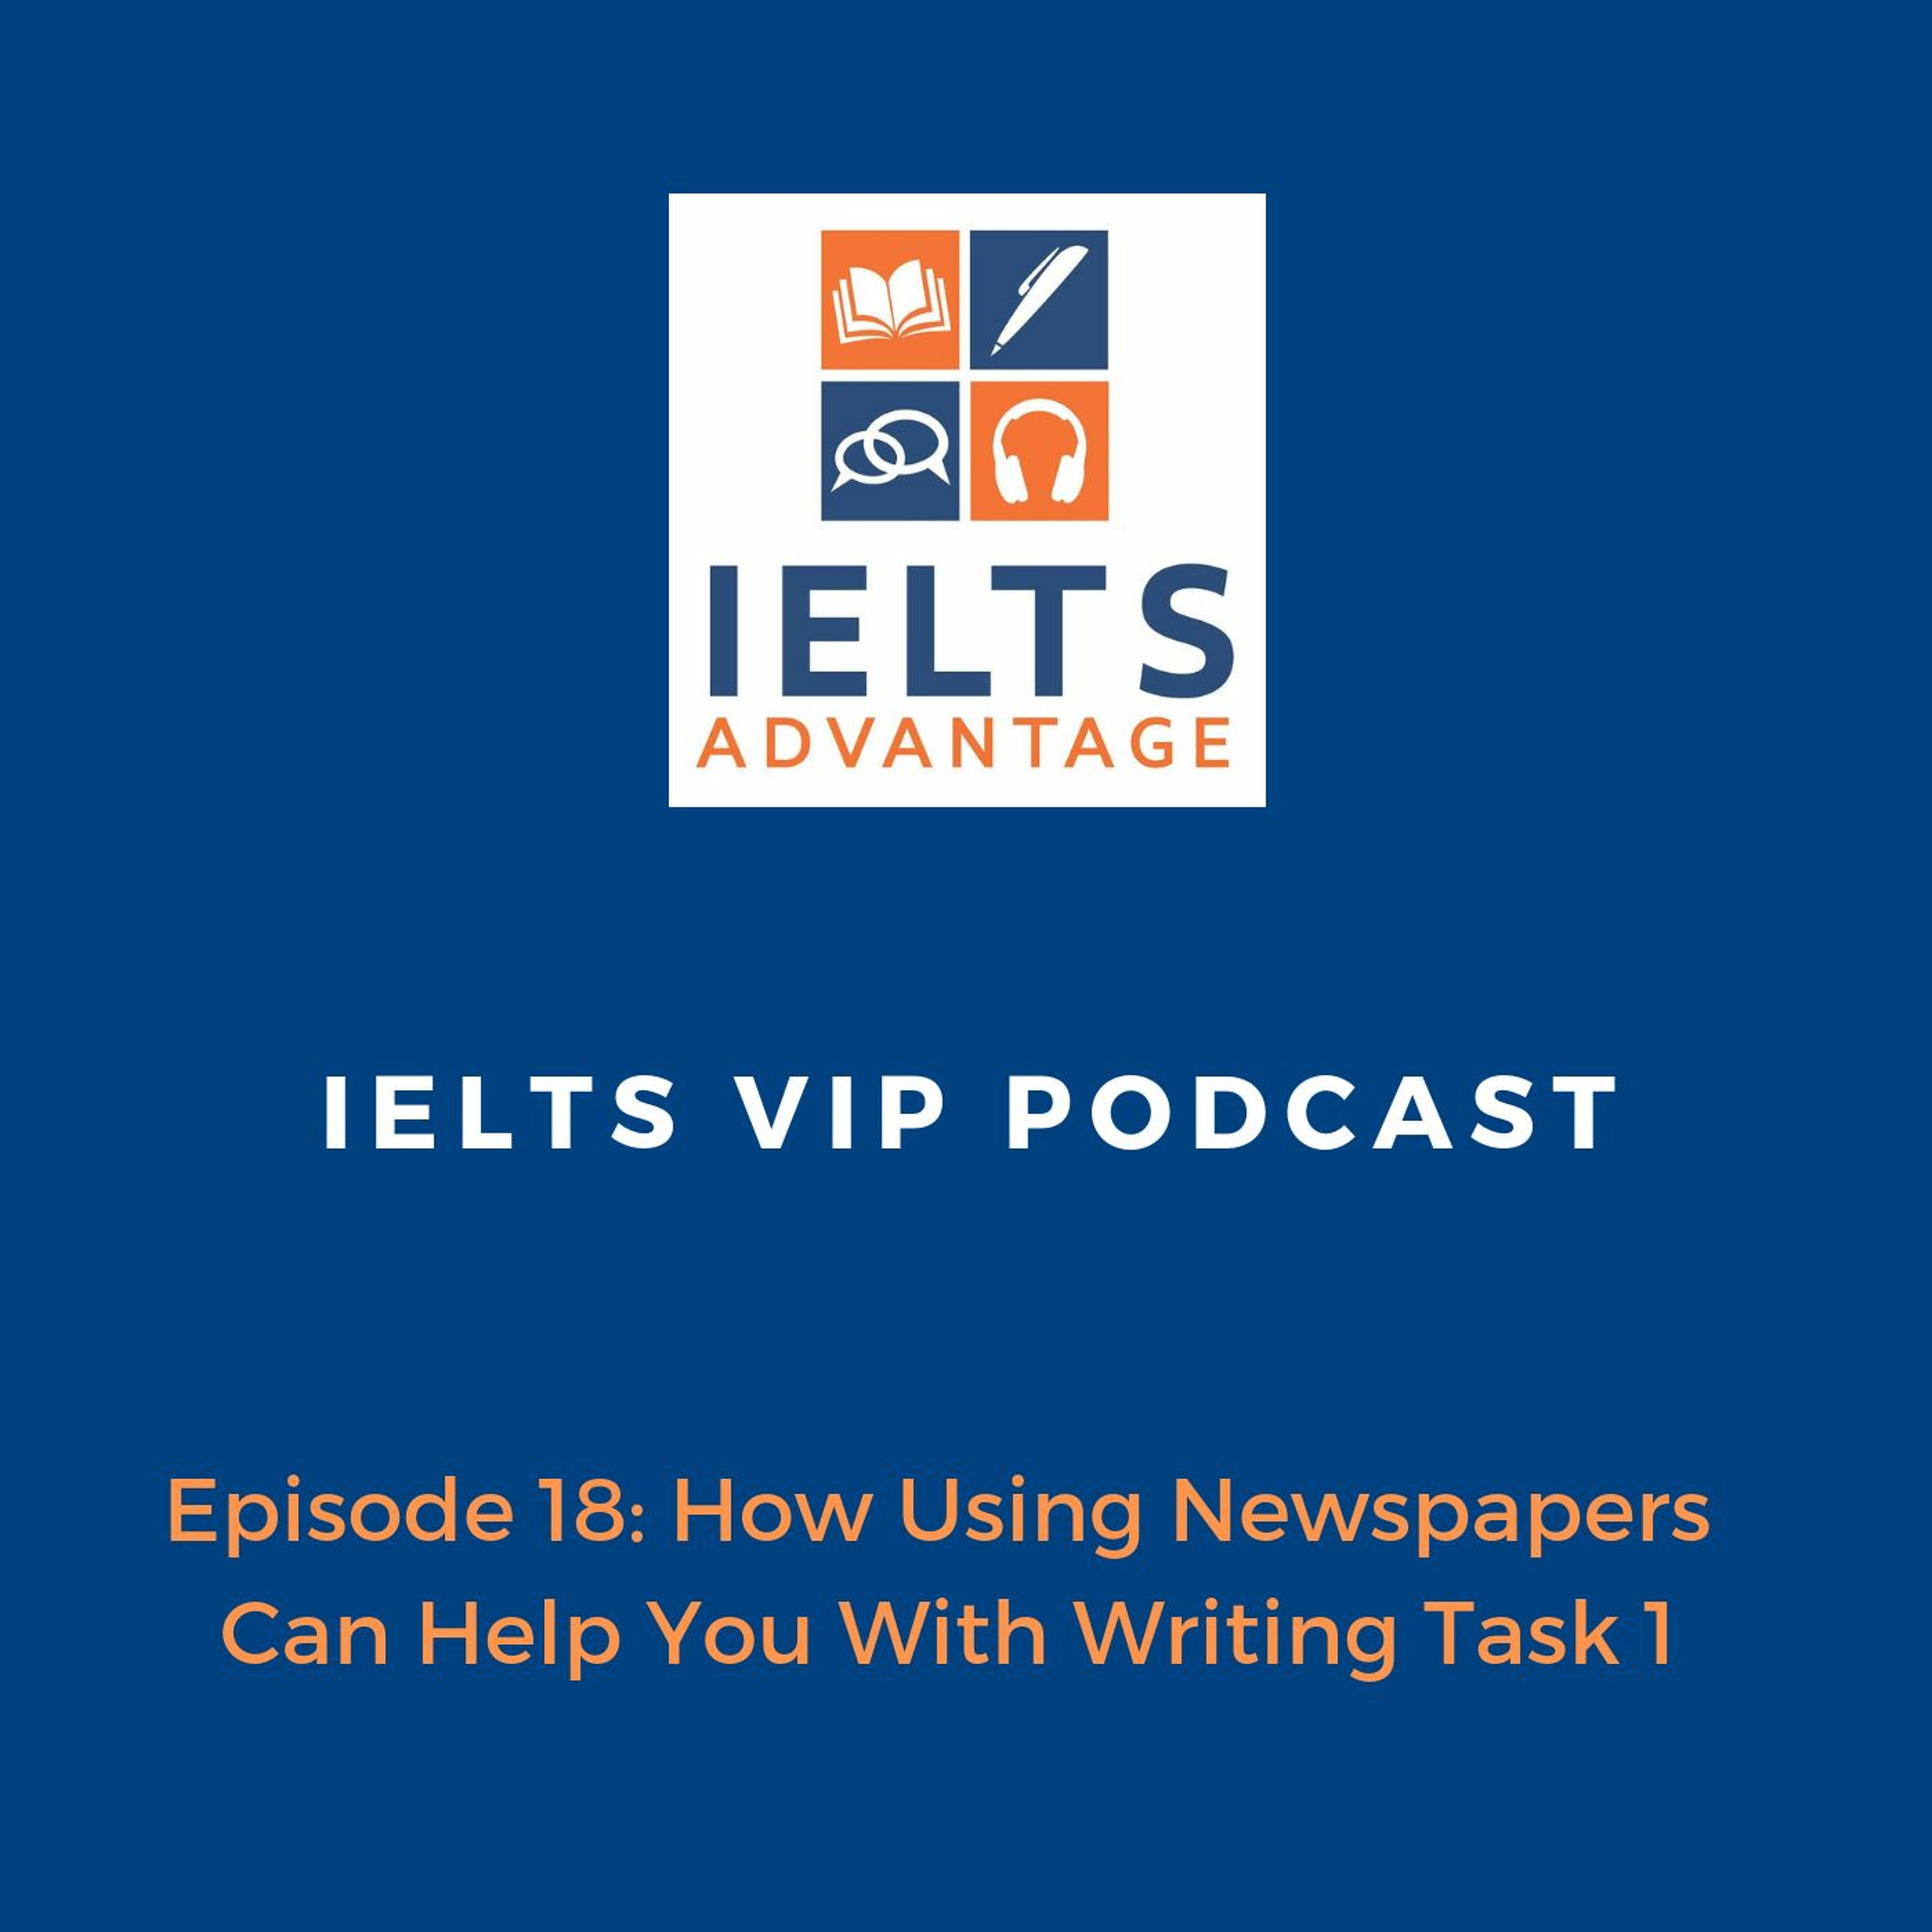 Episode 18: How Using Newspapers Can Help You With Writing Task 1